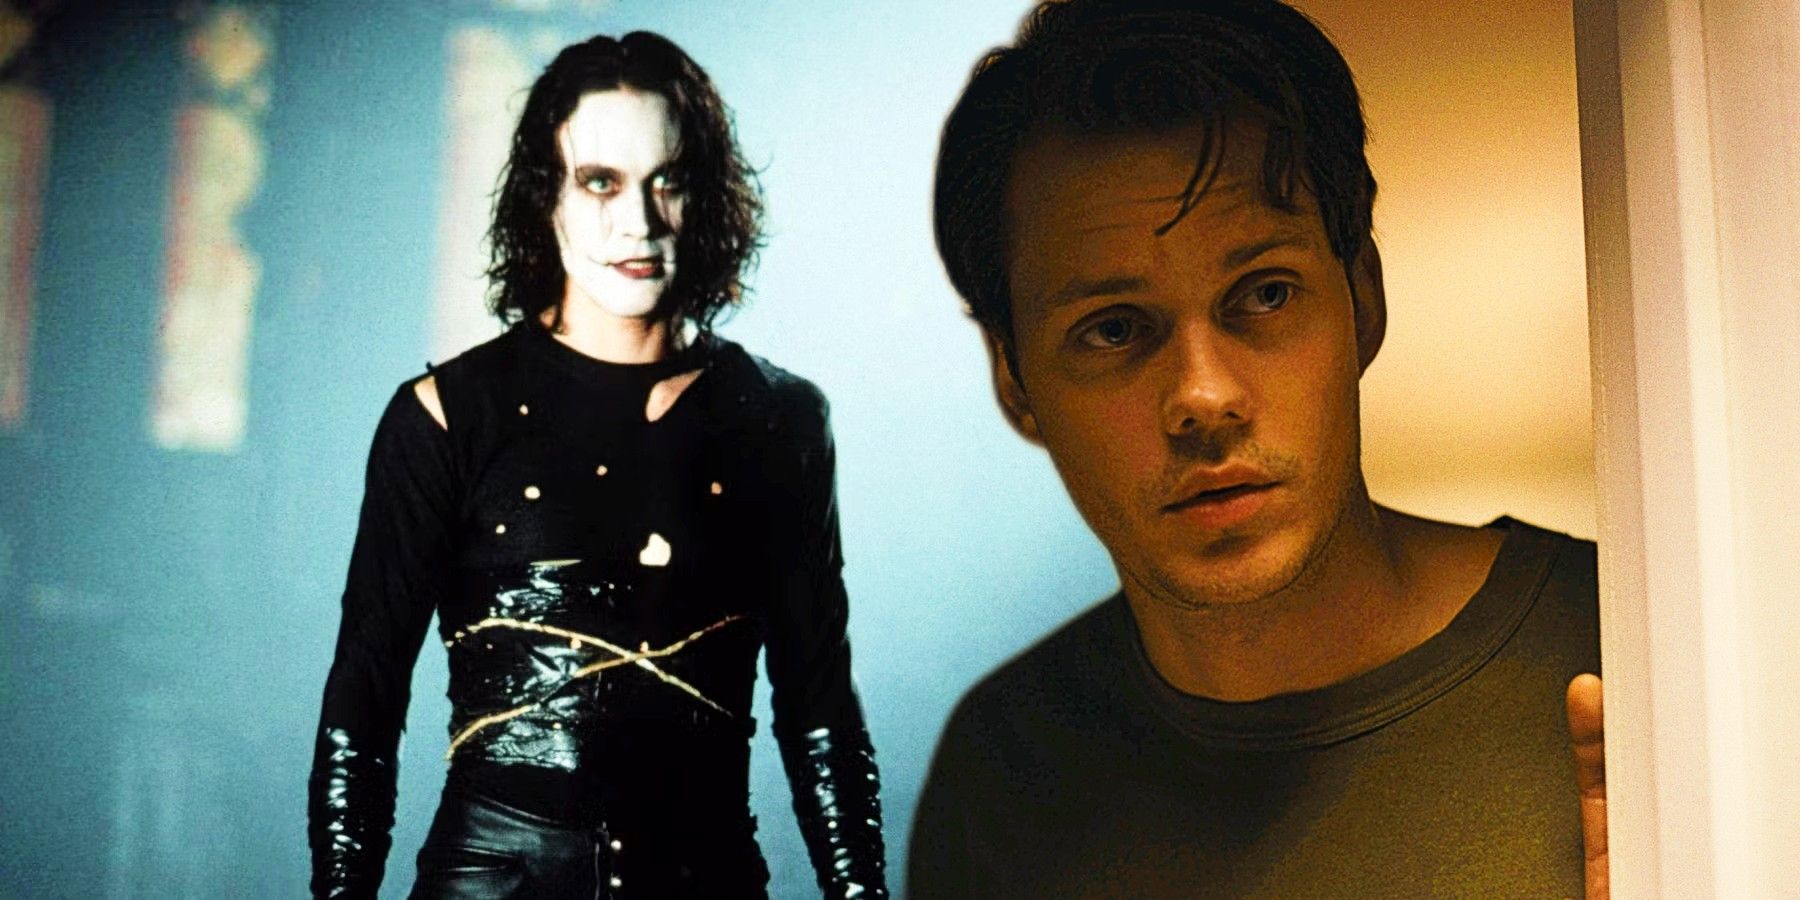 The Original Actor For The Crow’s Eric Draven Would Have Been Wildly Different